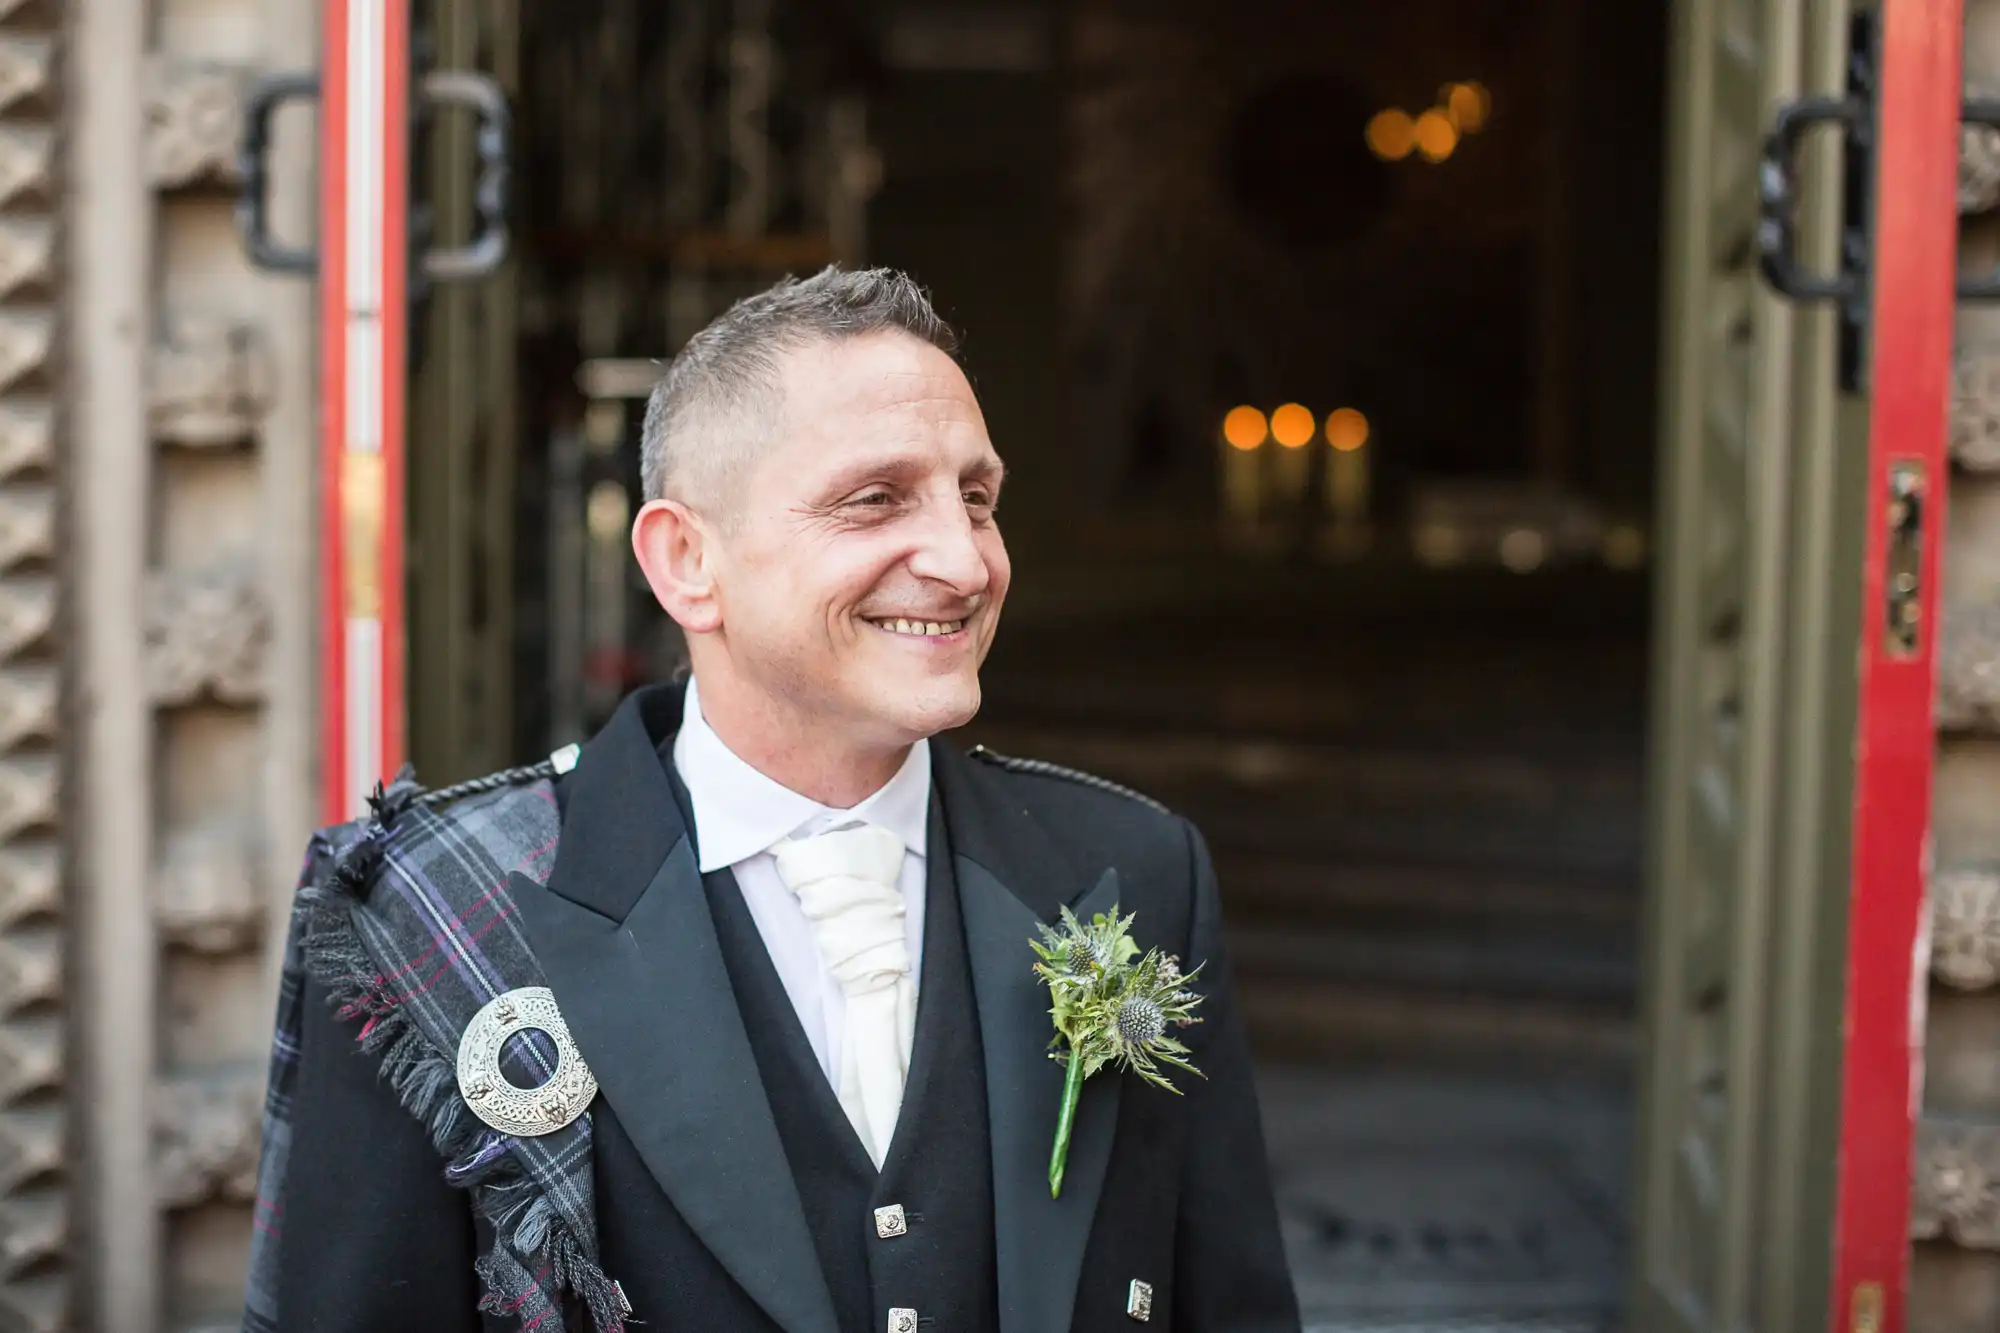 A smiling man in a scottish kilt and jacket with a boutonniere, standing in front of open ornate doors.